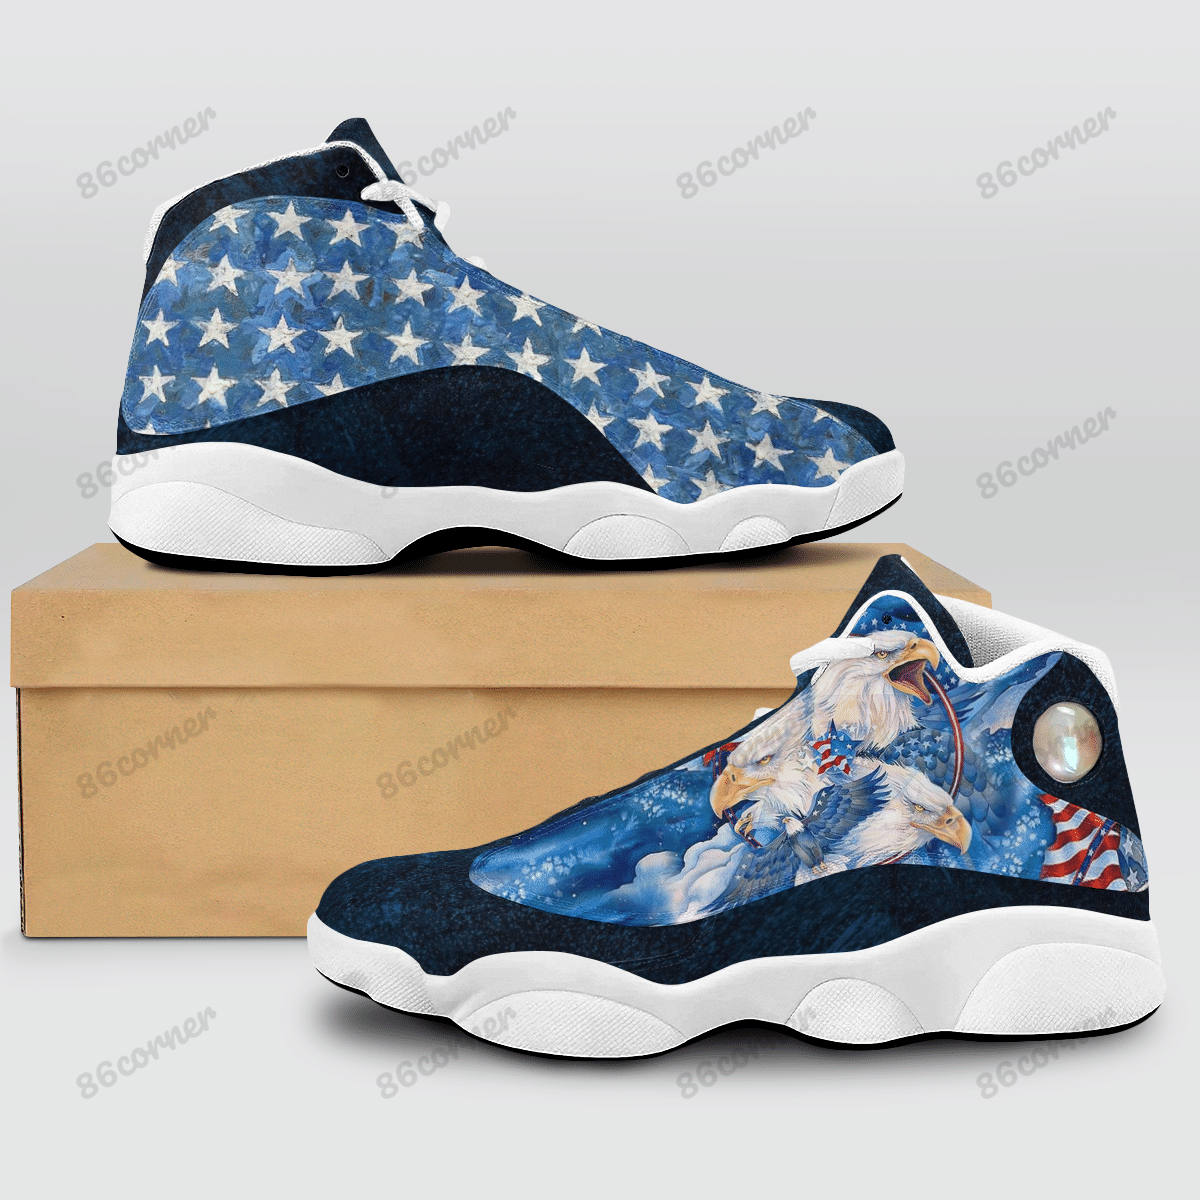 Blue Stars 13 Sneakers XIII Shoes